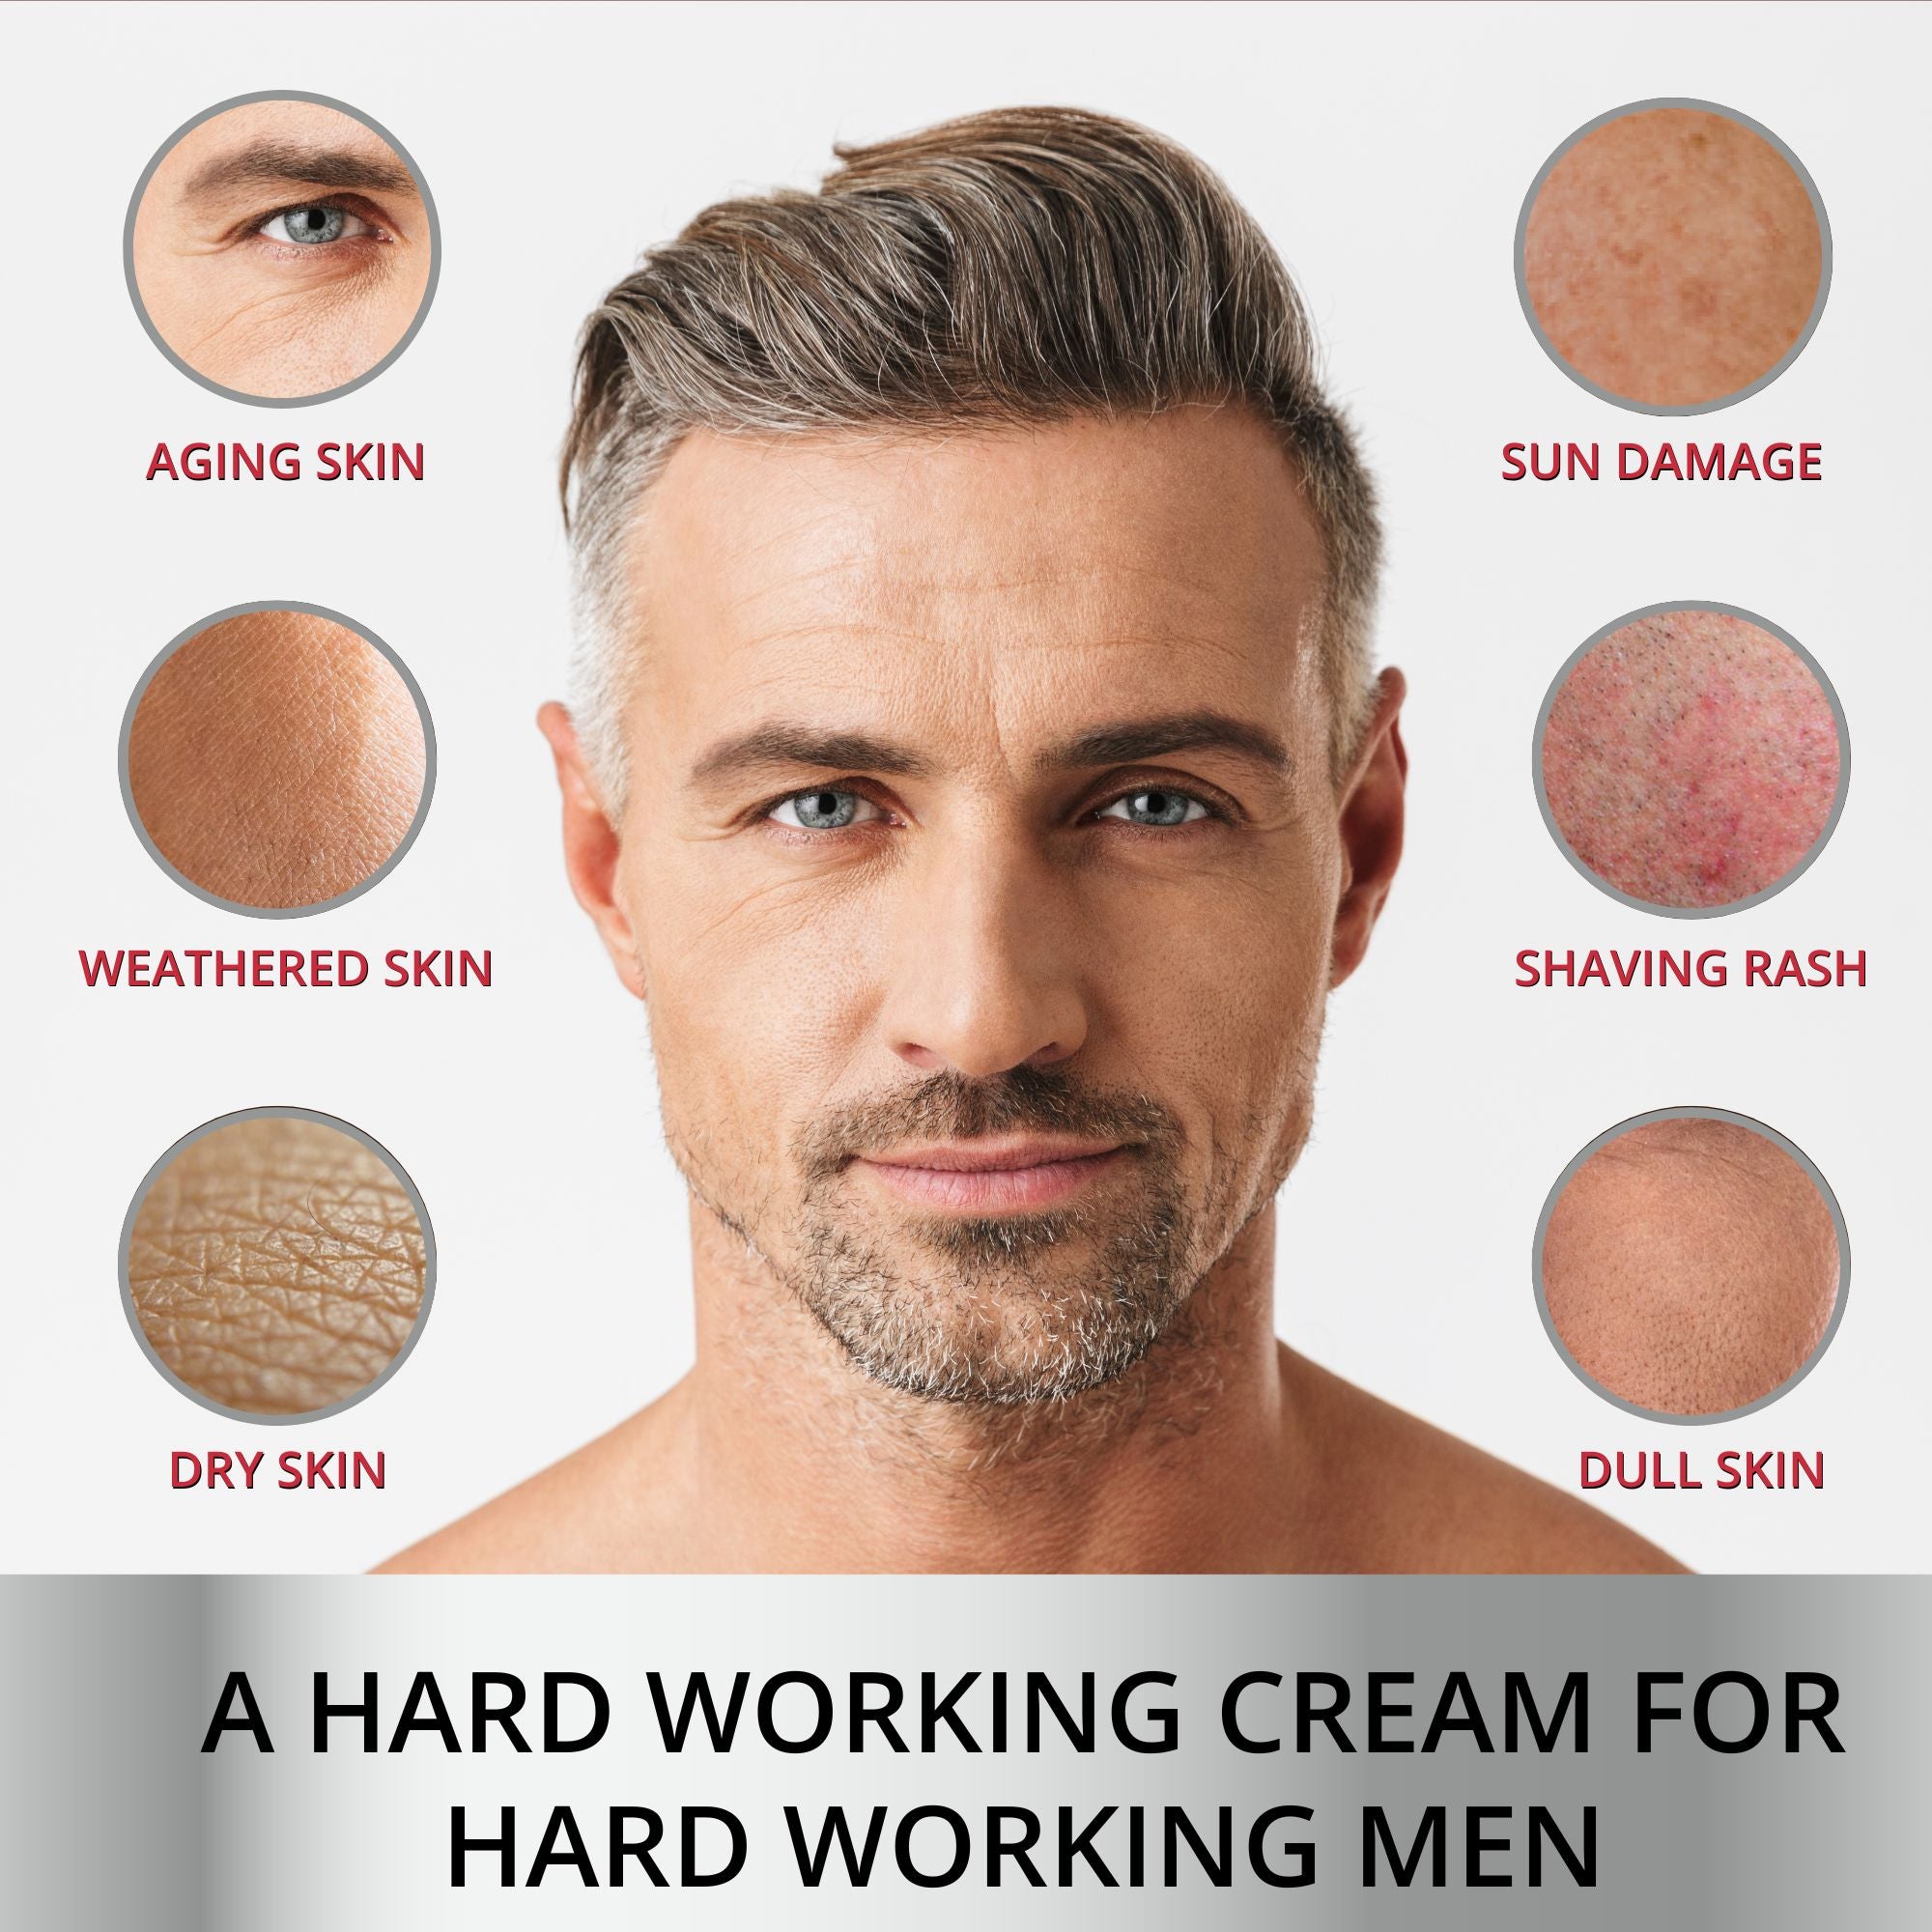 A hard-working face cream for men that combats sun damage, aging skin, shaving rash, weathered skin, dry skin, dull skin and pigmentation.